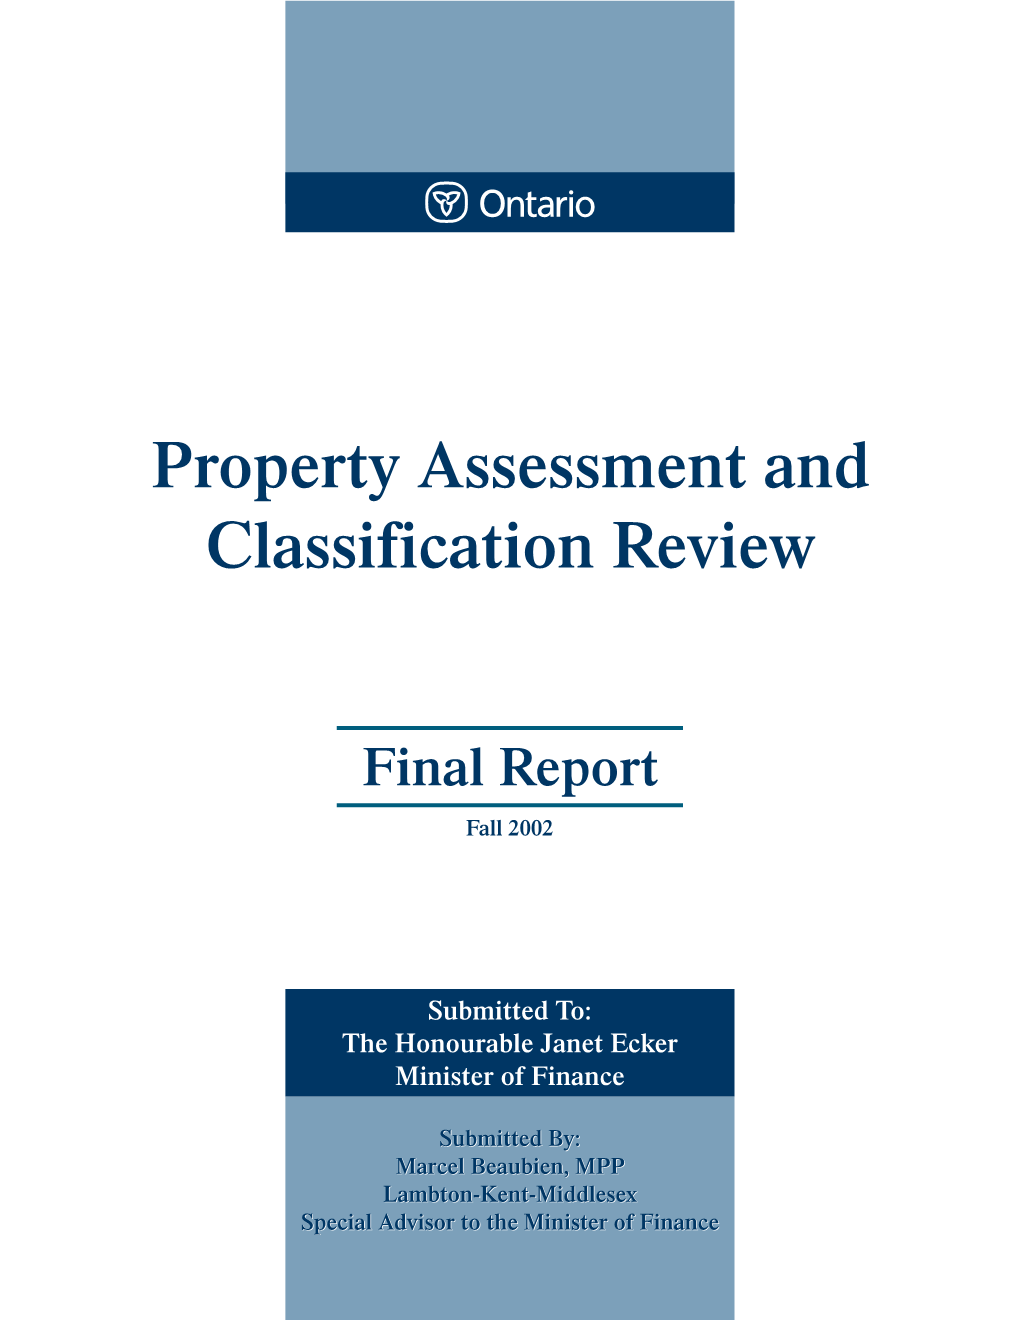 Property Assessment and Classification Review : Final Report